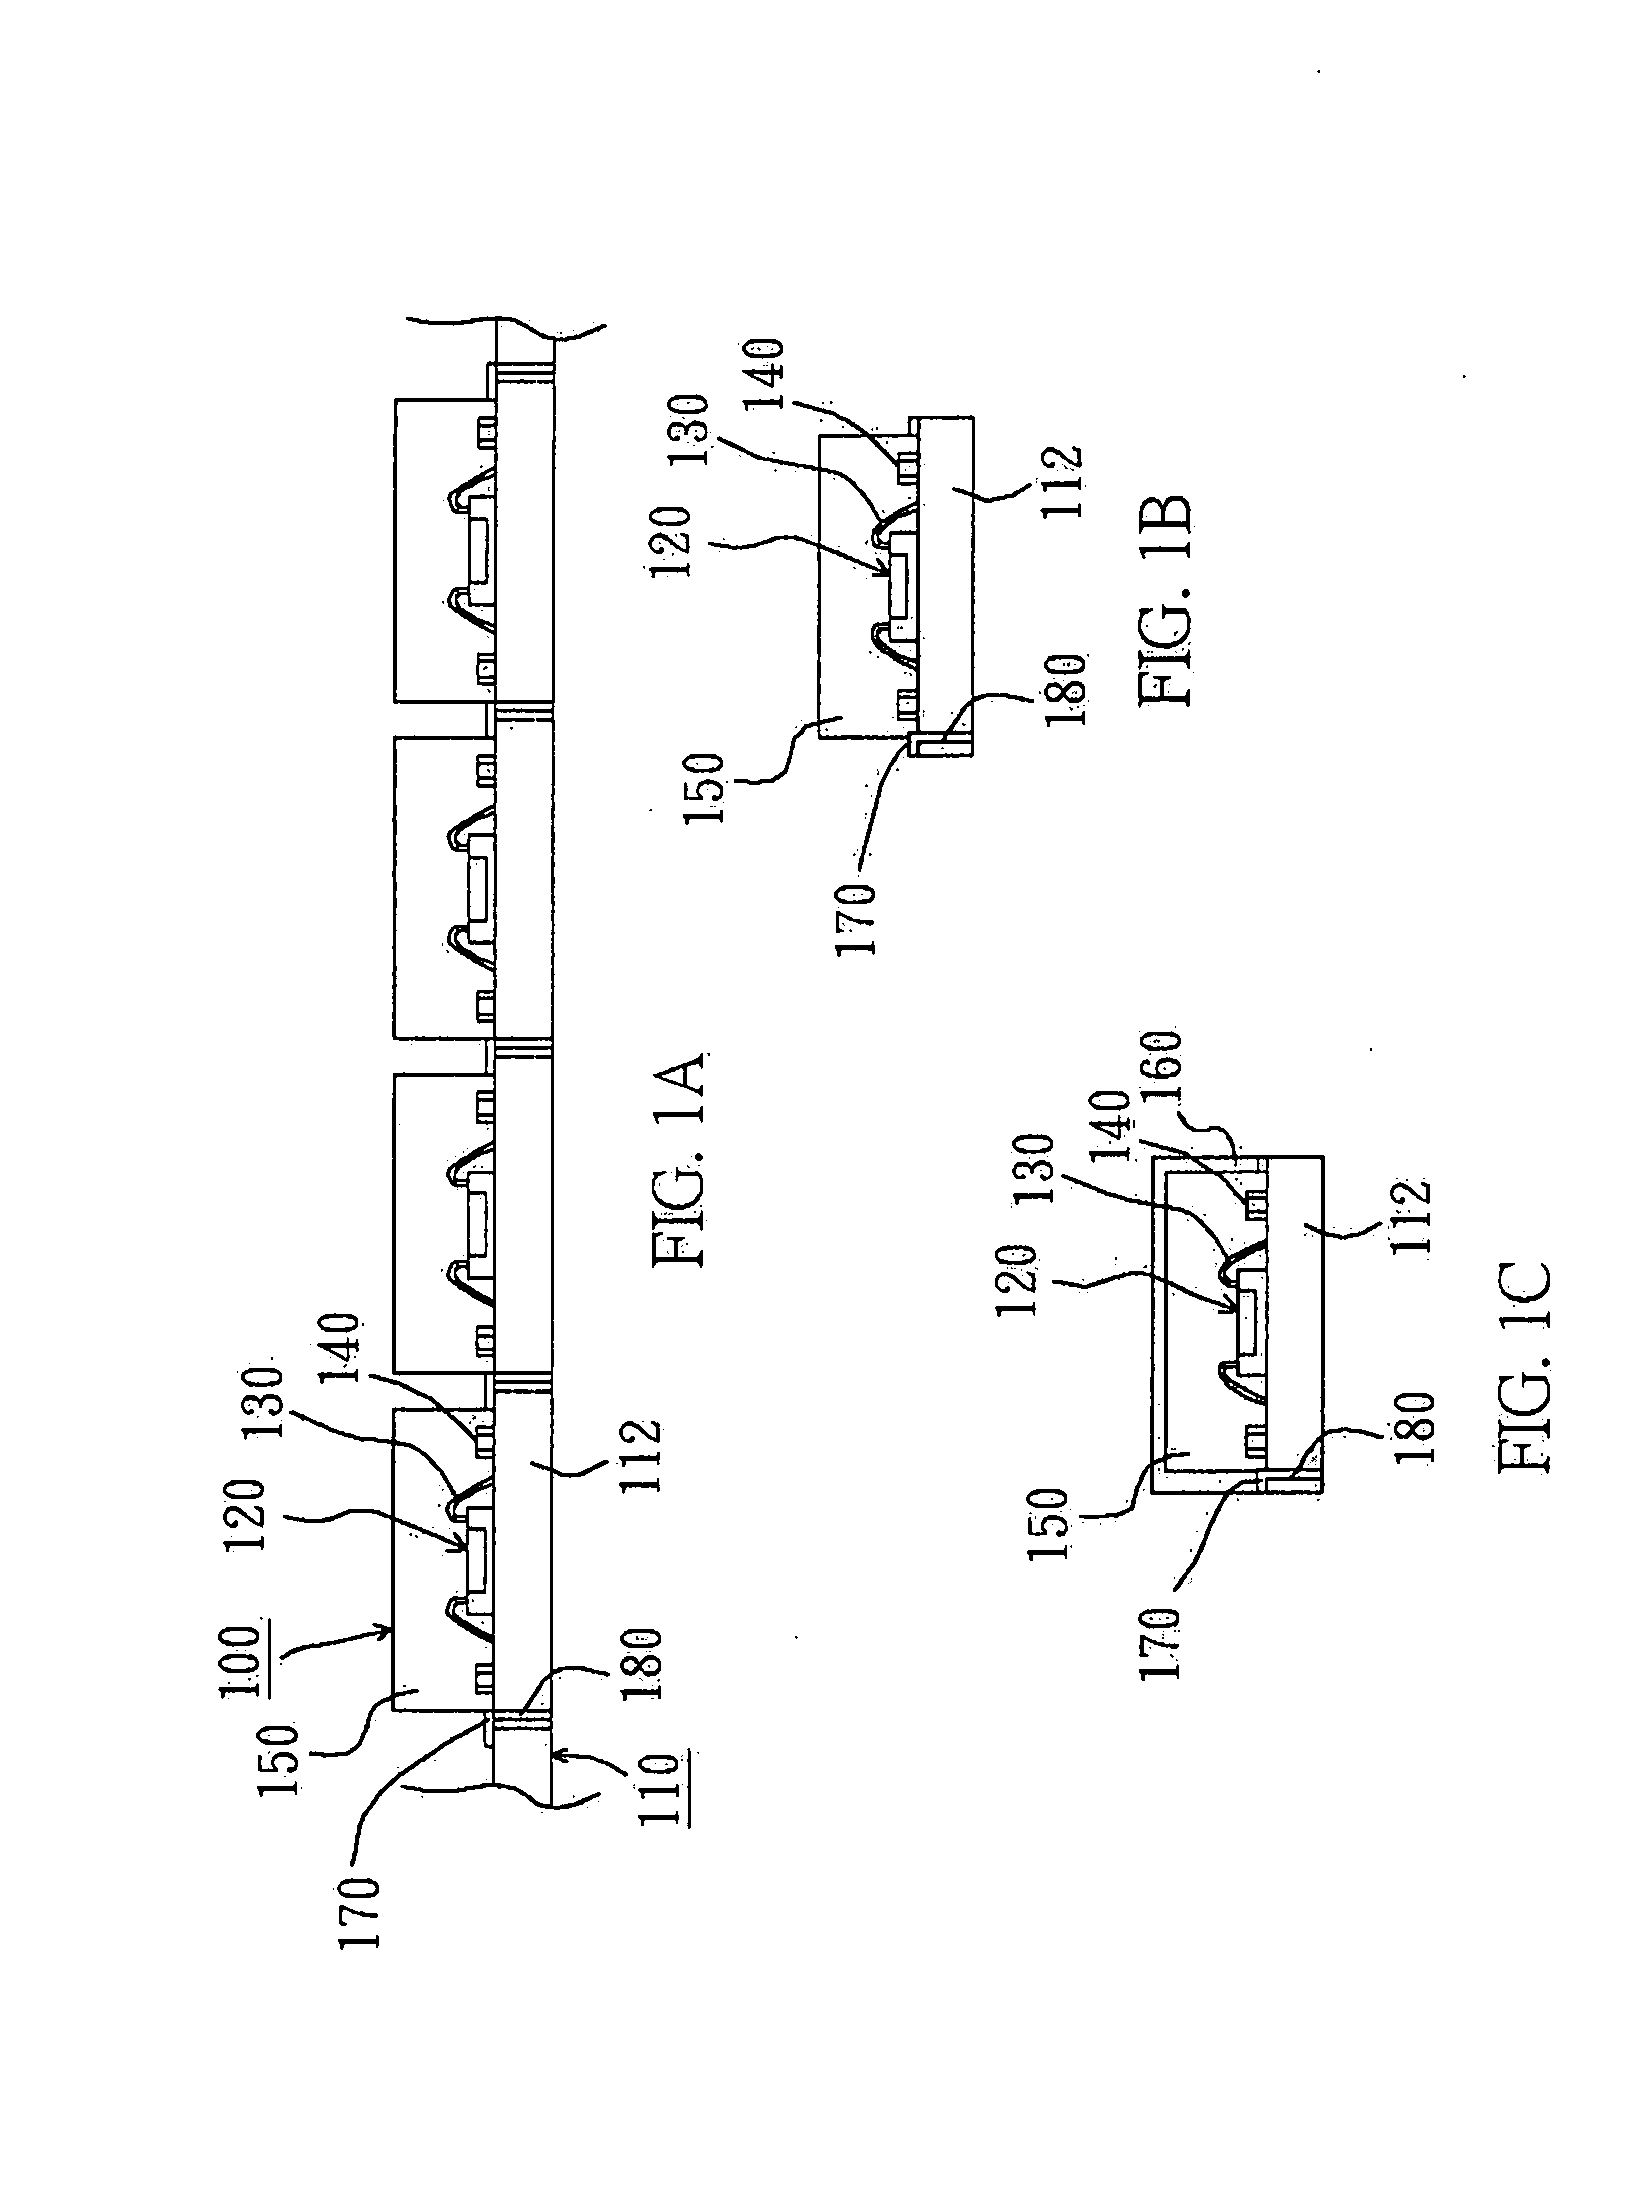 Semiconductor device package and manufacturing method